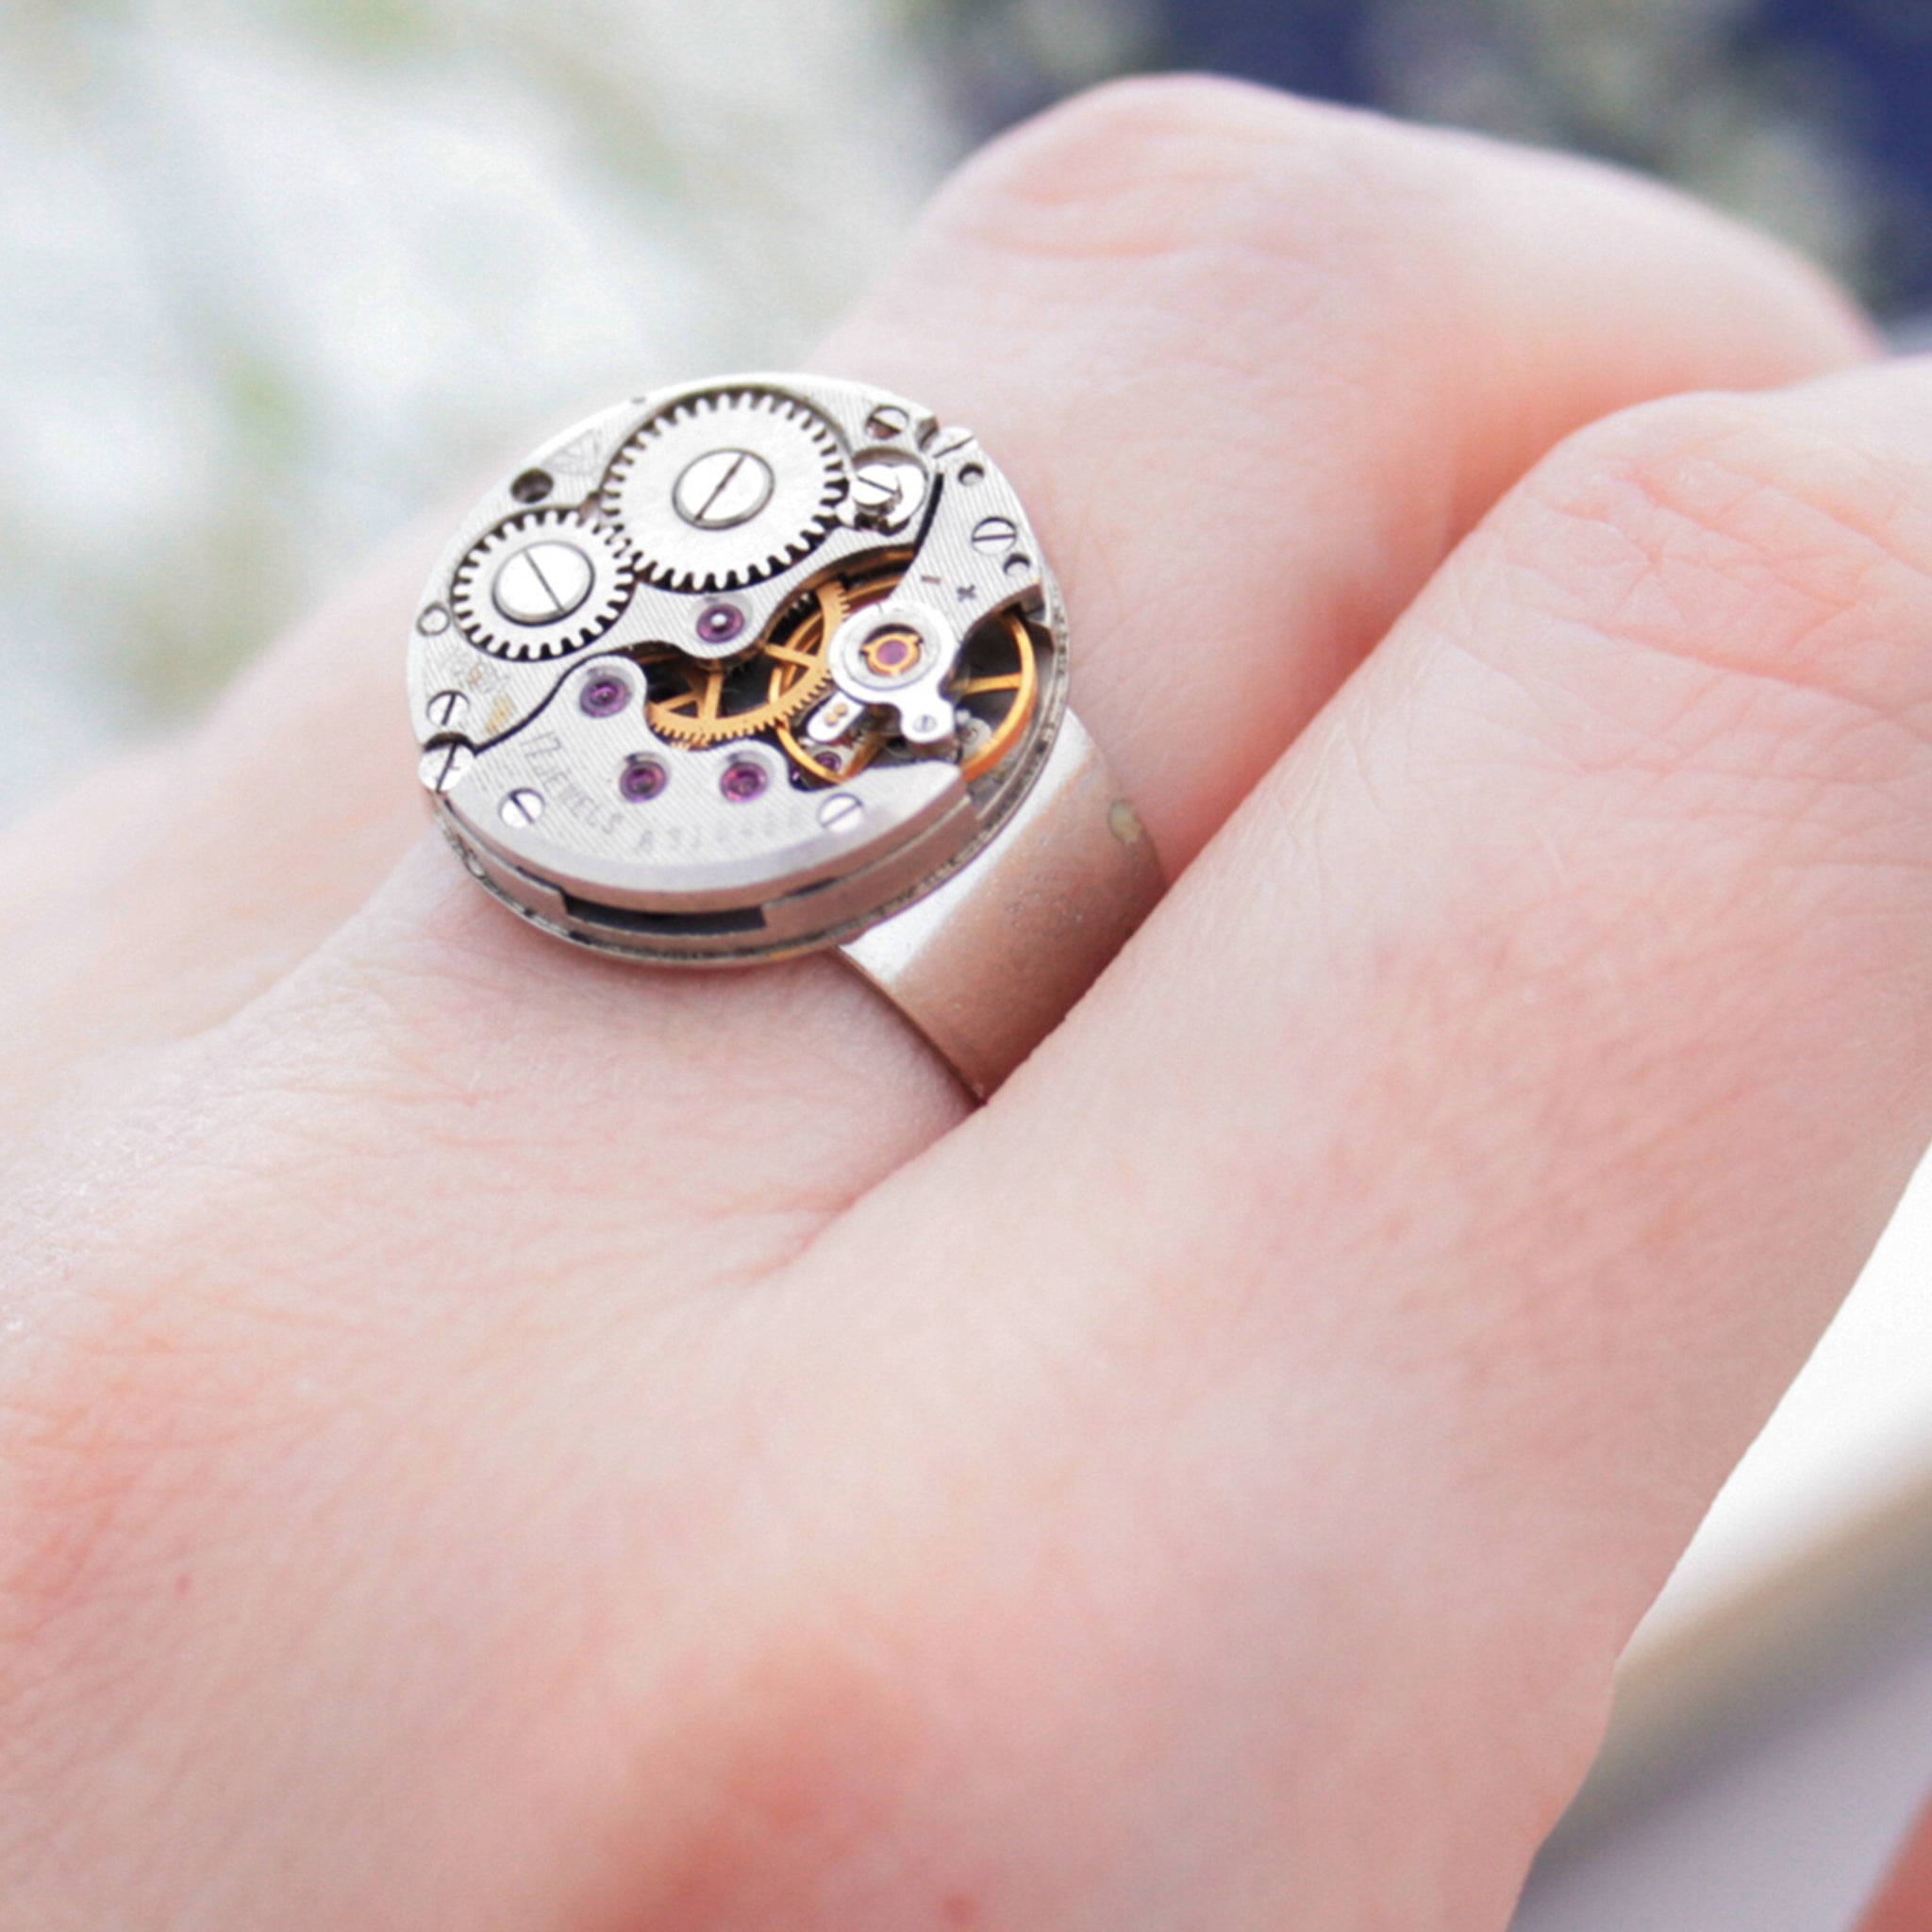 Round Steampunk Mens Signet Ring made of watch inside on hand